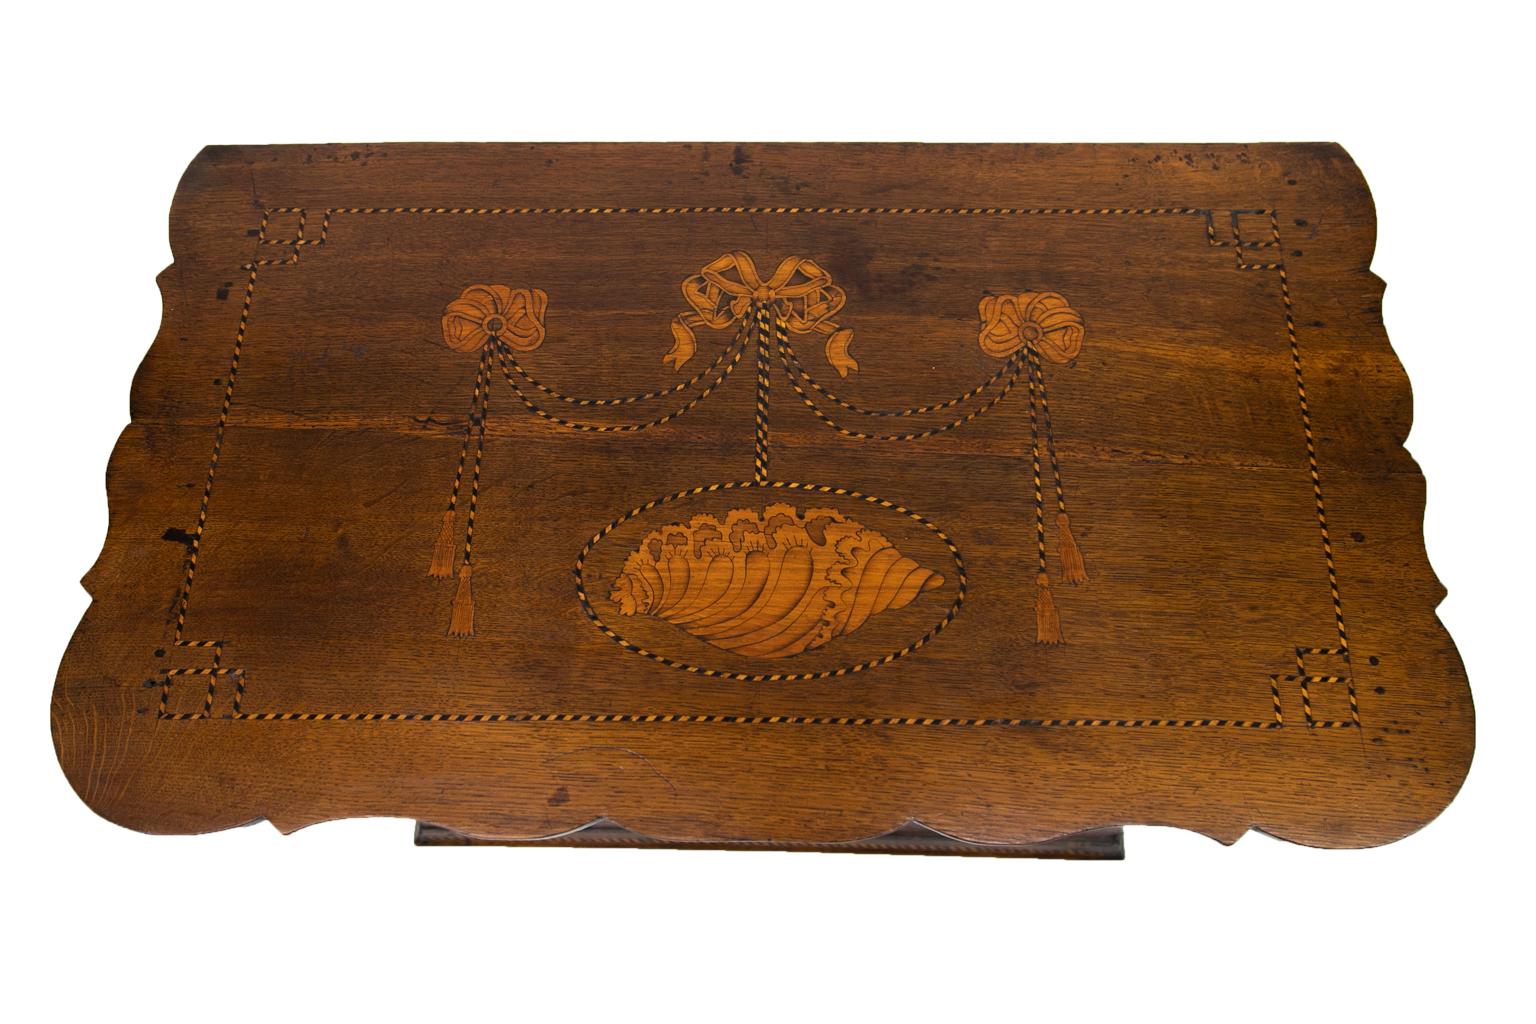 Three-drawer English oak inlaid chest, inlaid with elaborate conch shells and ribbon drapery on the top, drawer fronts and sides. The top has a scalloped shape on three sides.